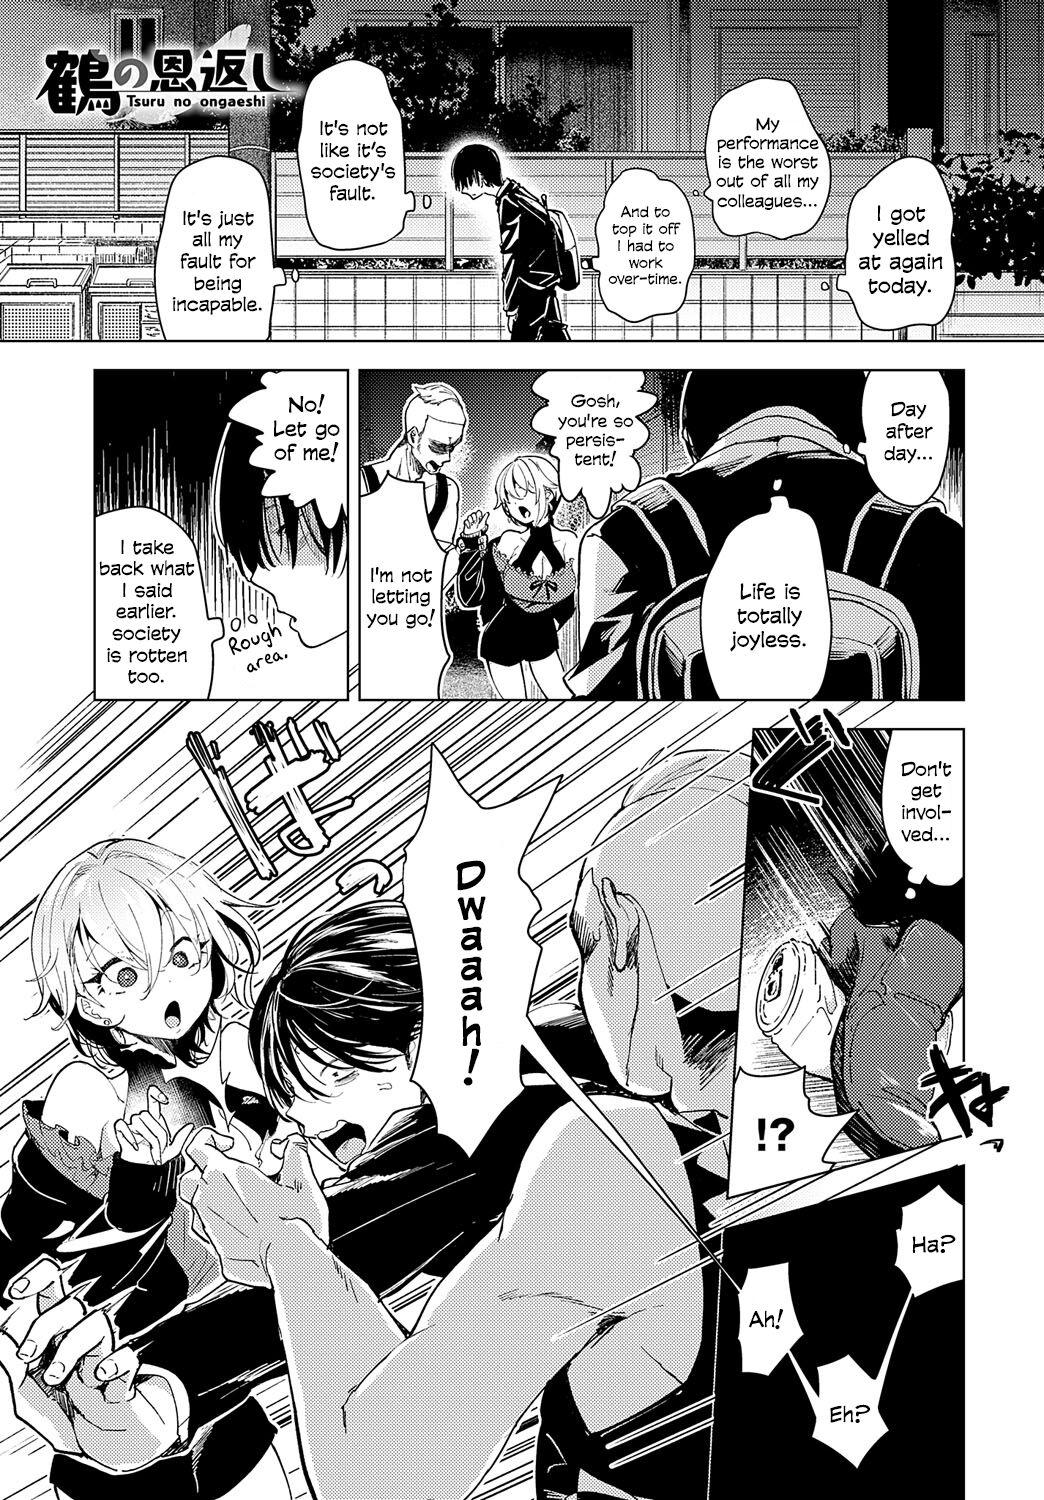 Beurette Tsuru No Ongaeshi | Crane's Return of a Favor Point Of View - Page 1